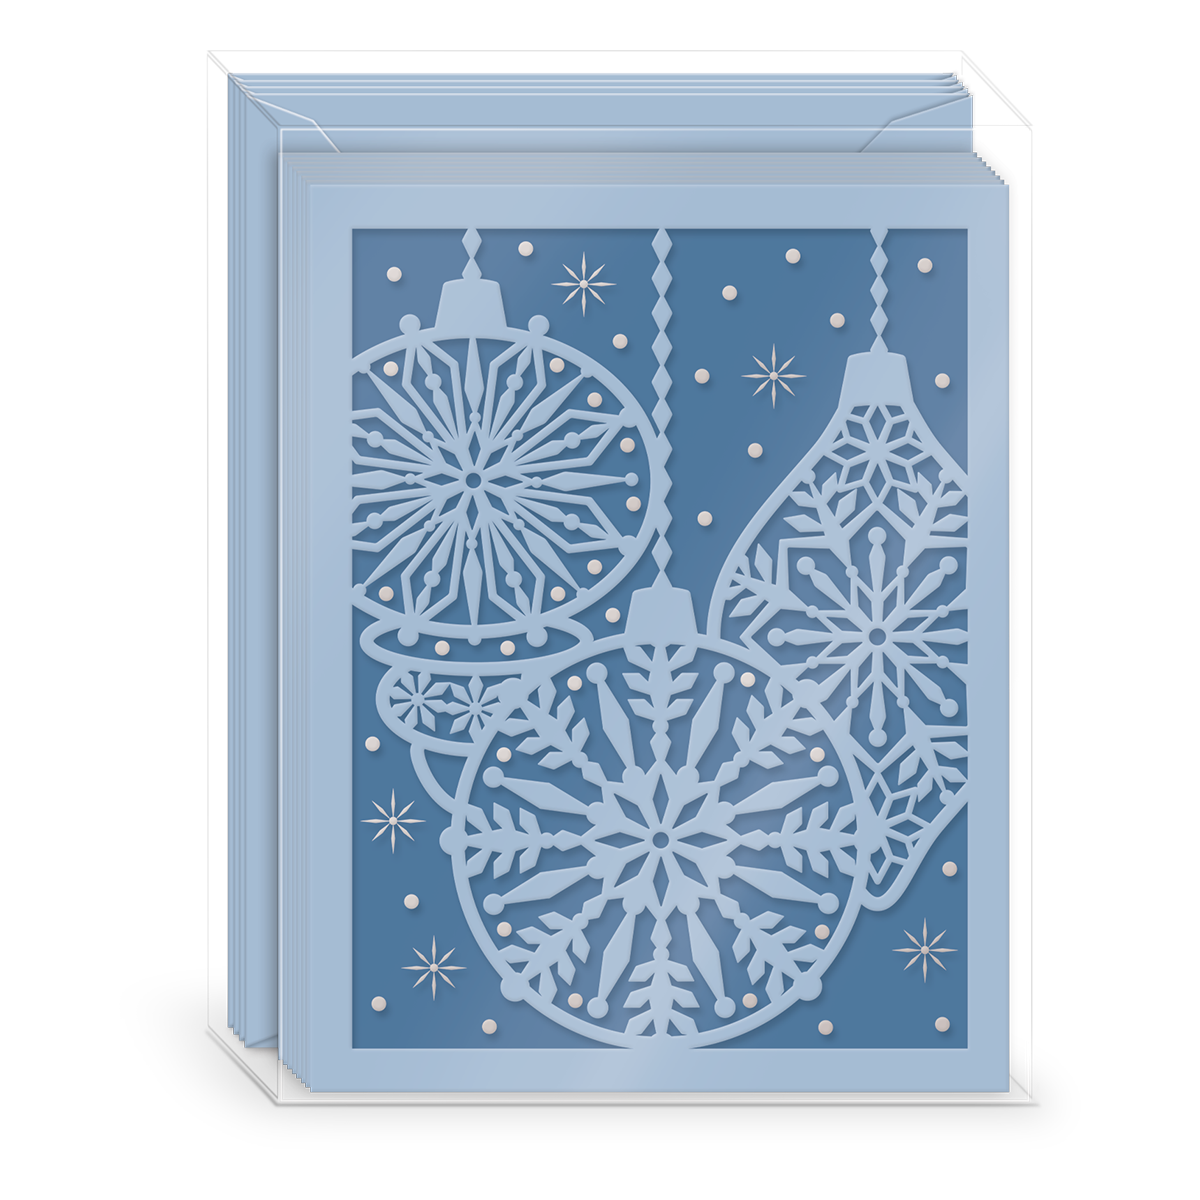 Snowflake Ornaments Boxed Holiday Cards Product